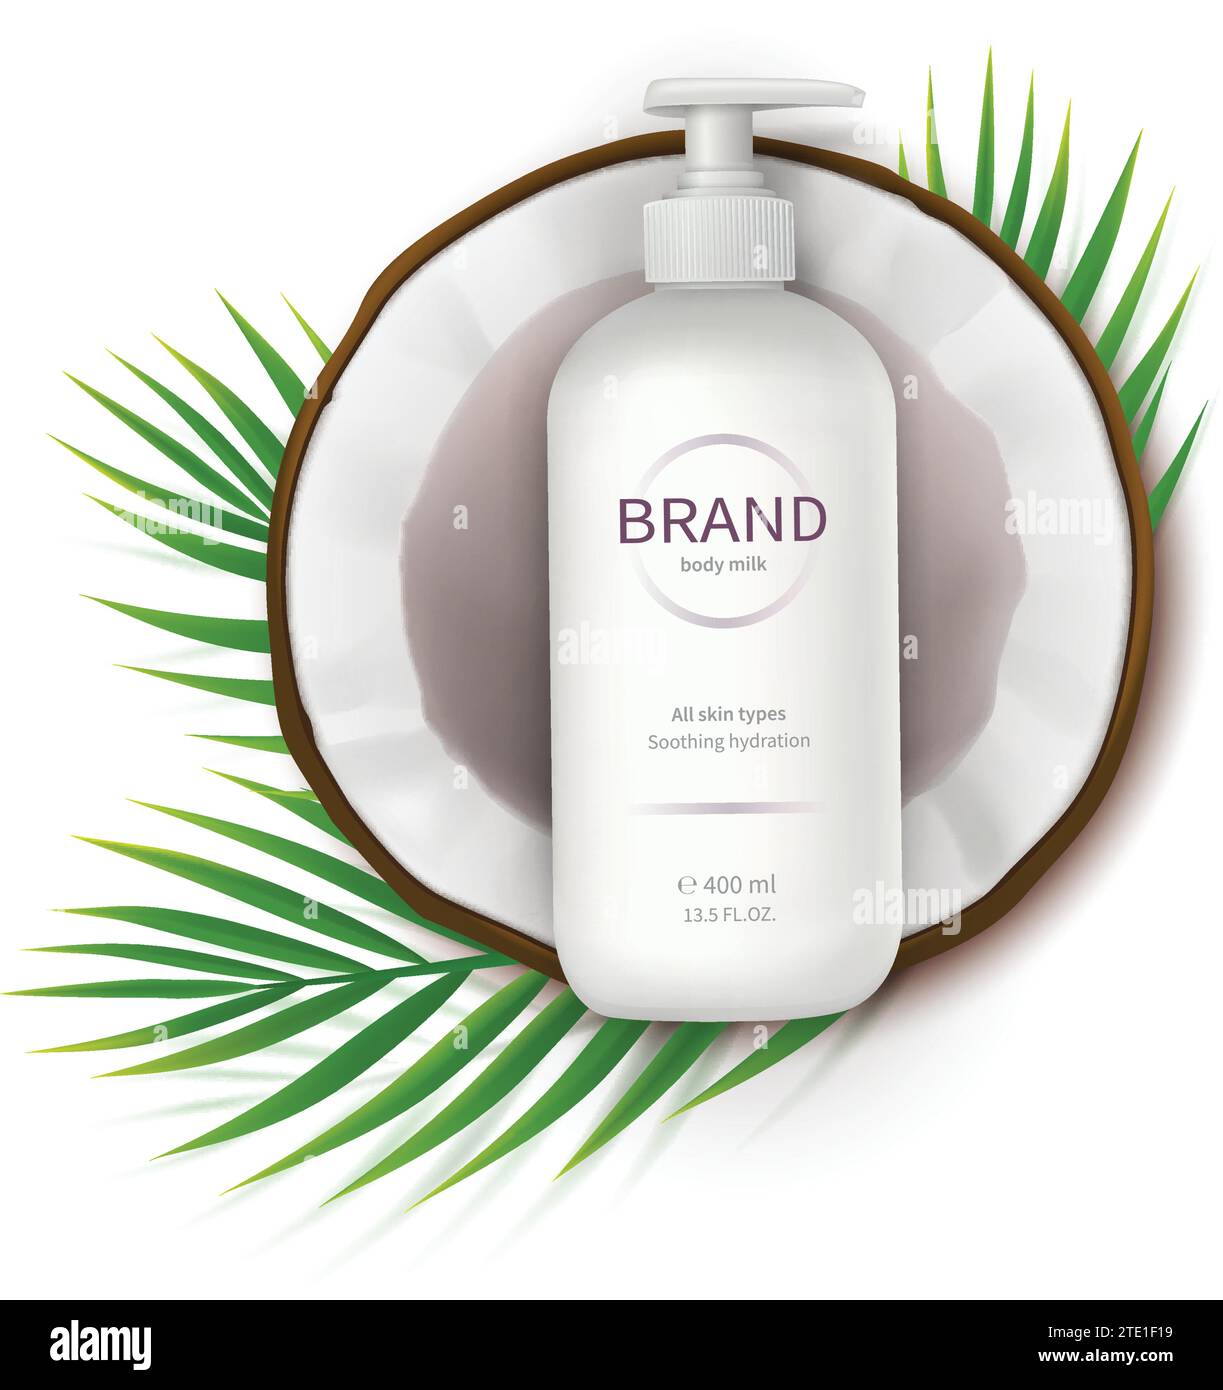 Cosmetic ad realistic vector. White dispenser bottle lies in half of coconut isolated on white background. Design elements for promo banner for natural organic cosmetics Stock Vector